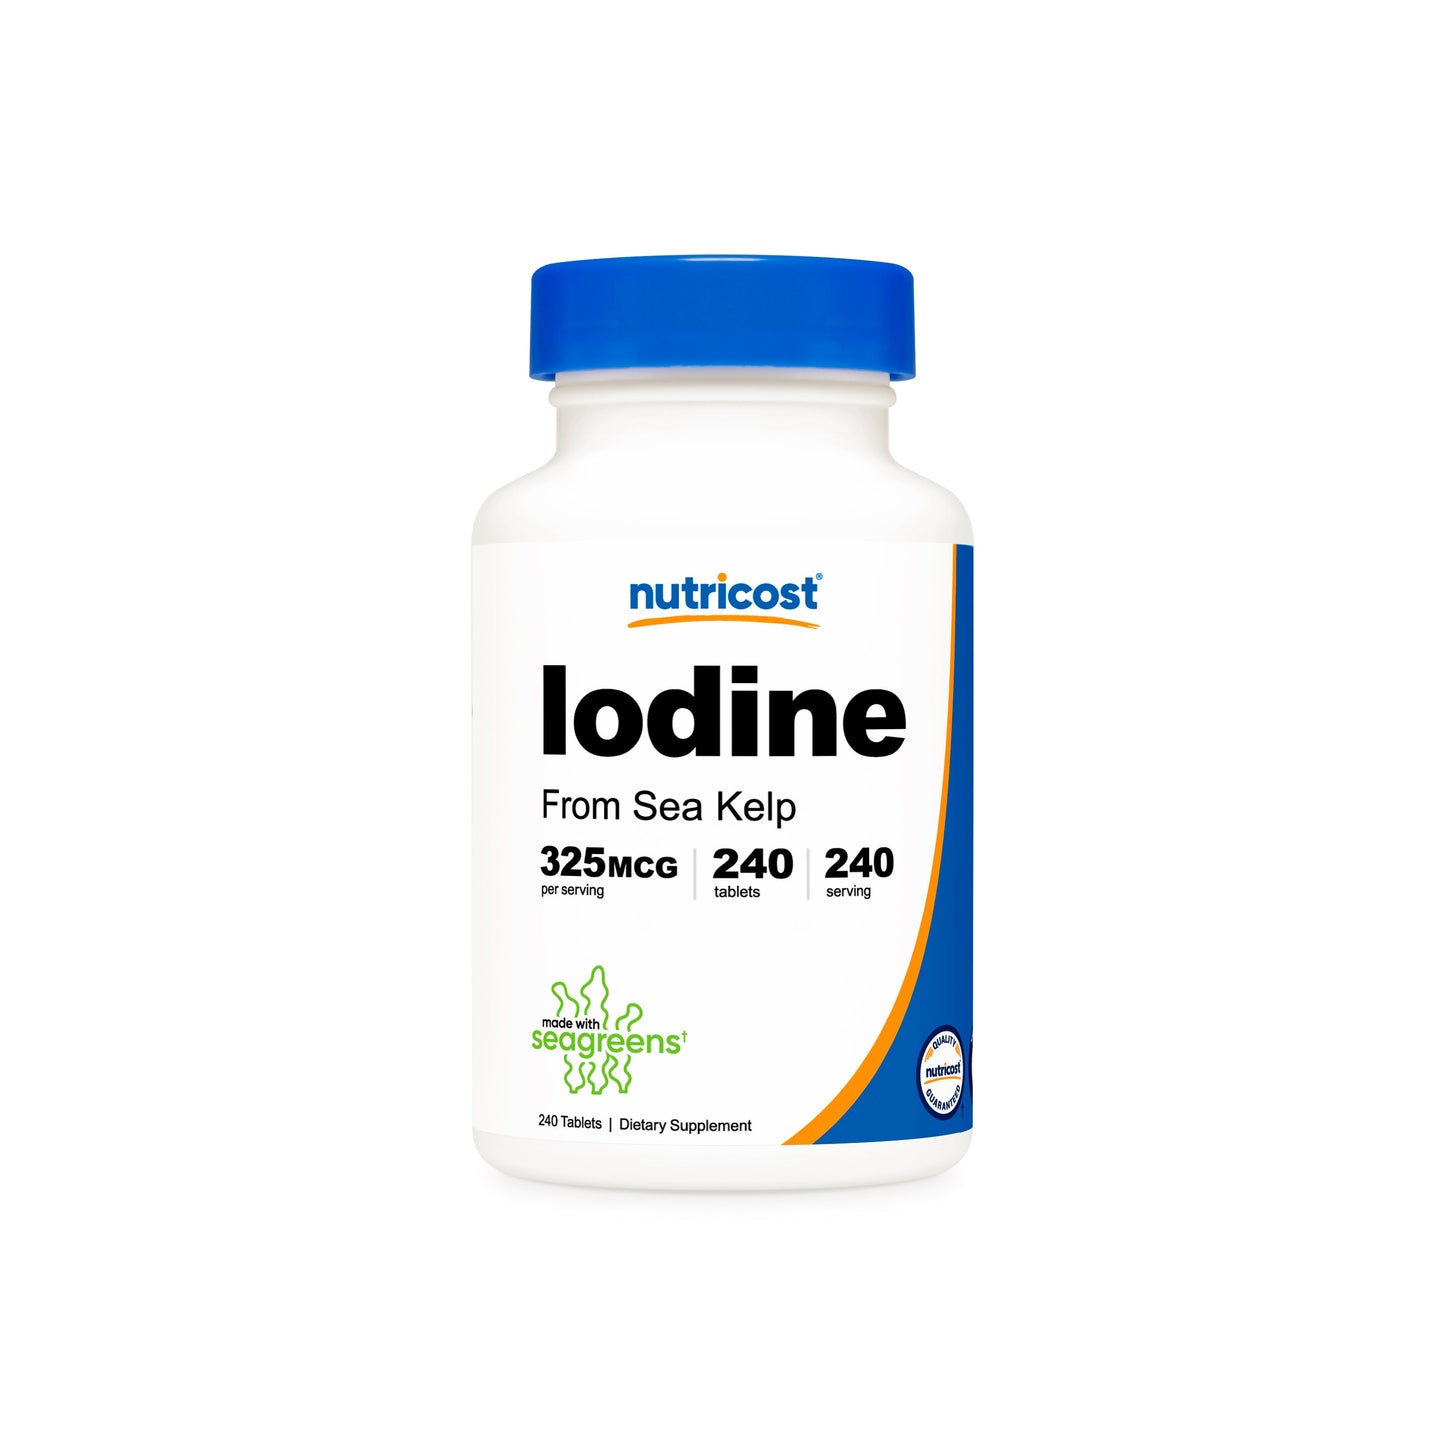 Nutricost Iodine Tablets